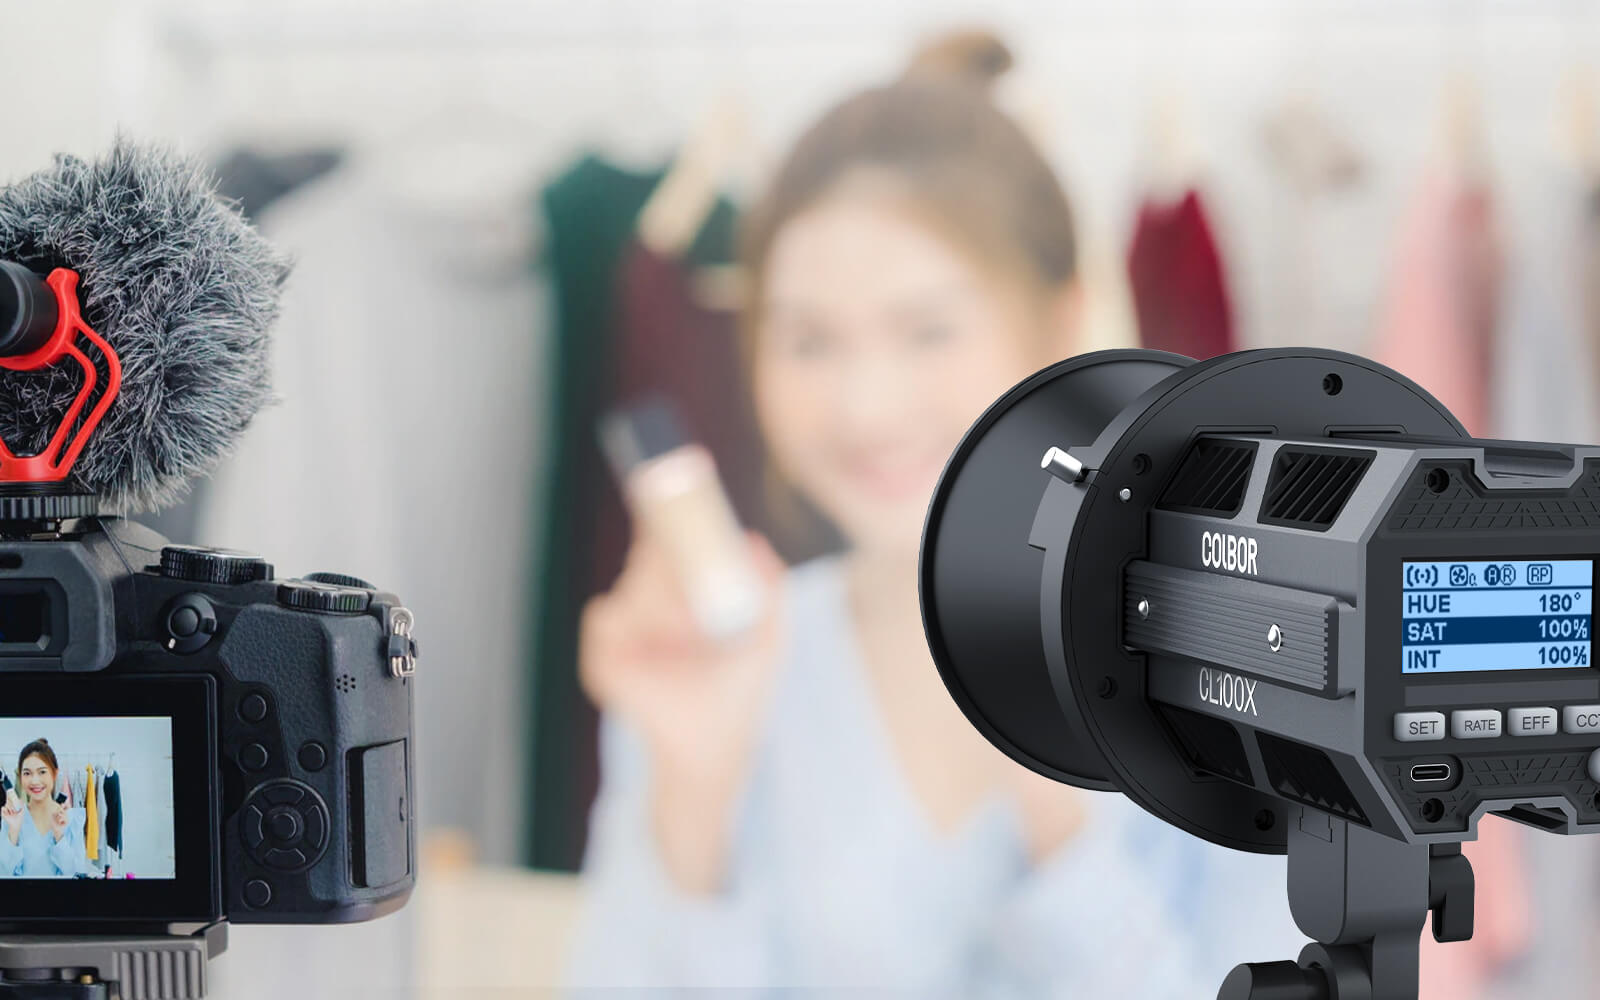 COLBOR CL100X is used to light up makeup videos.